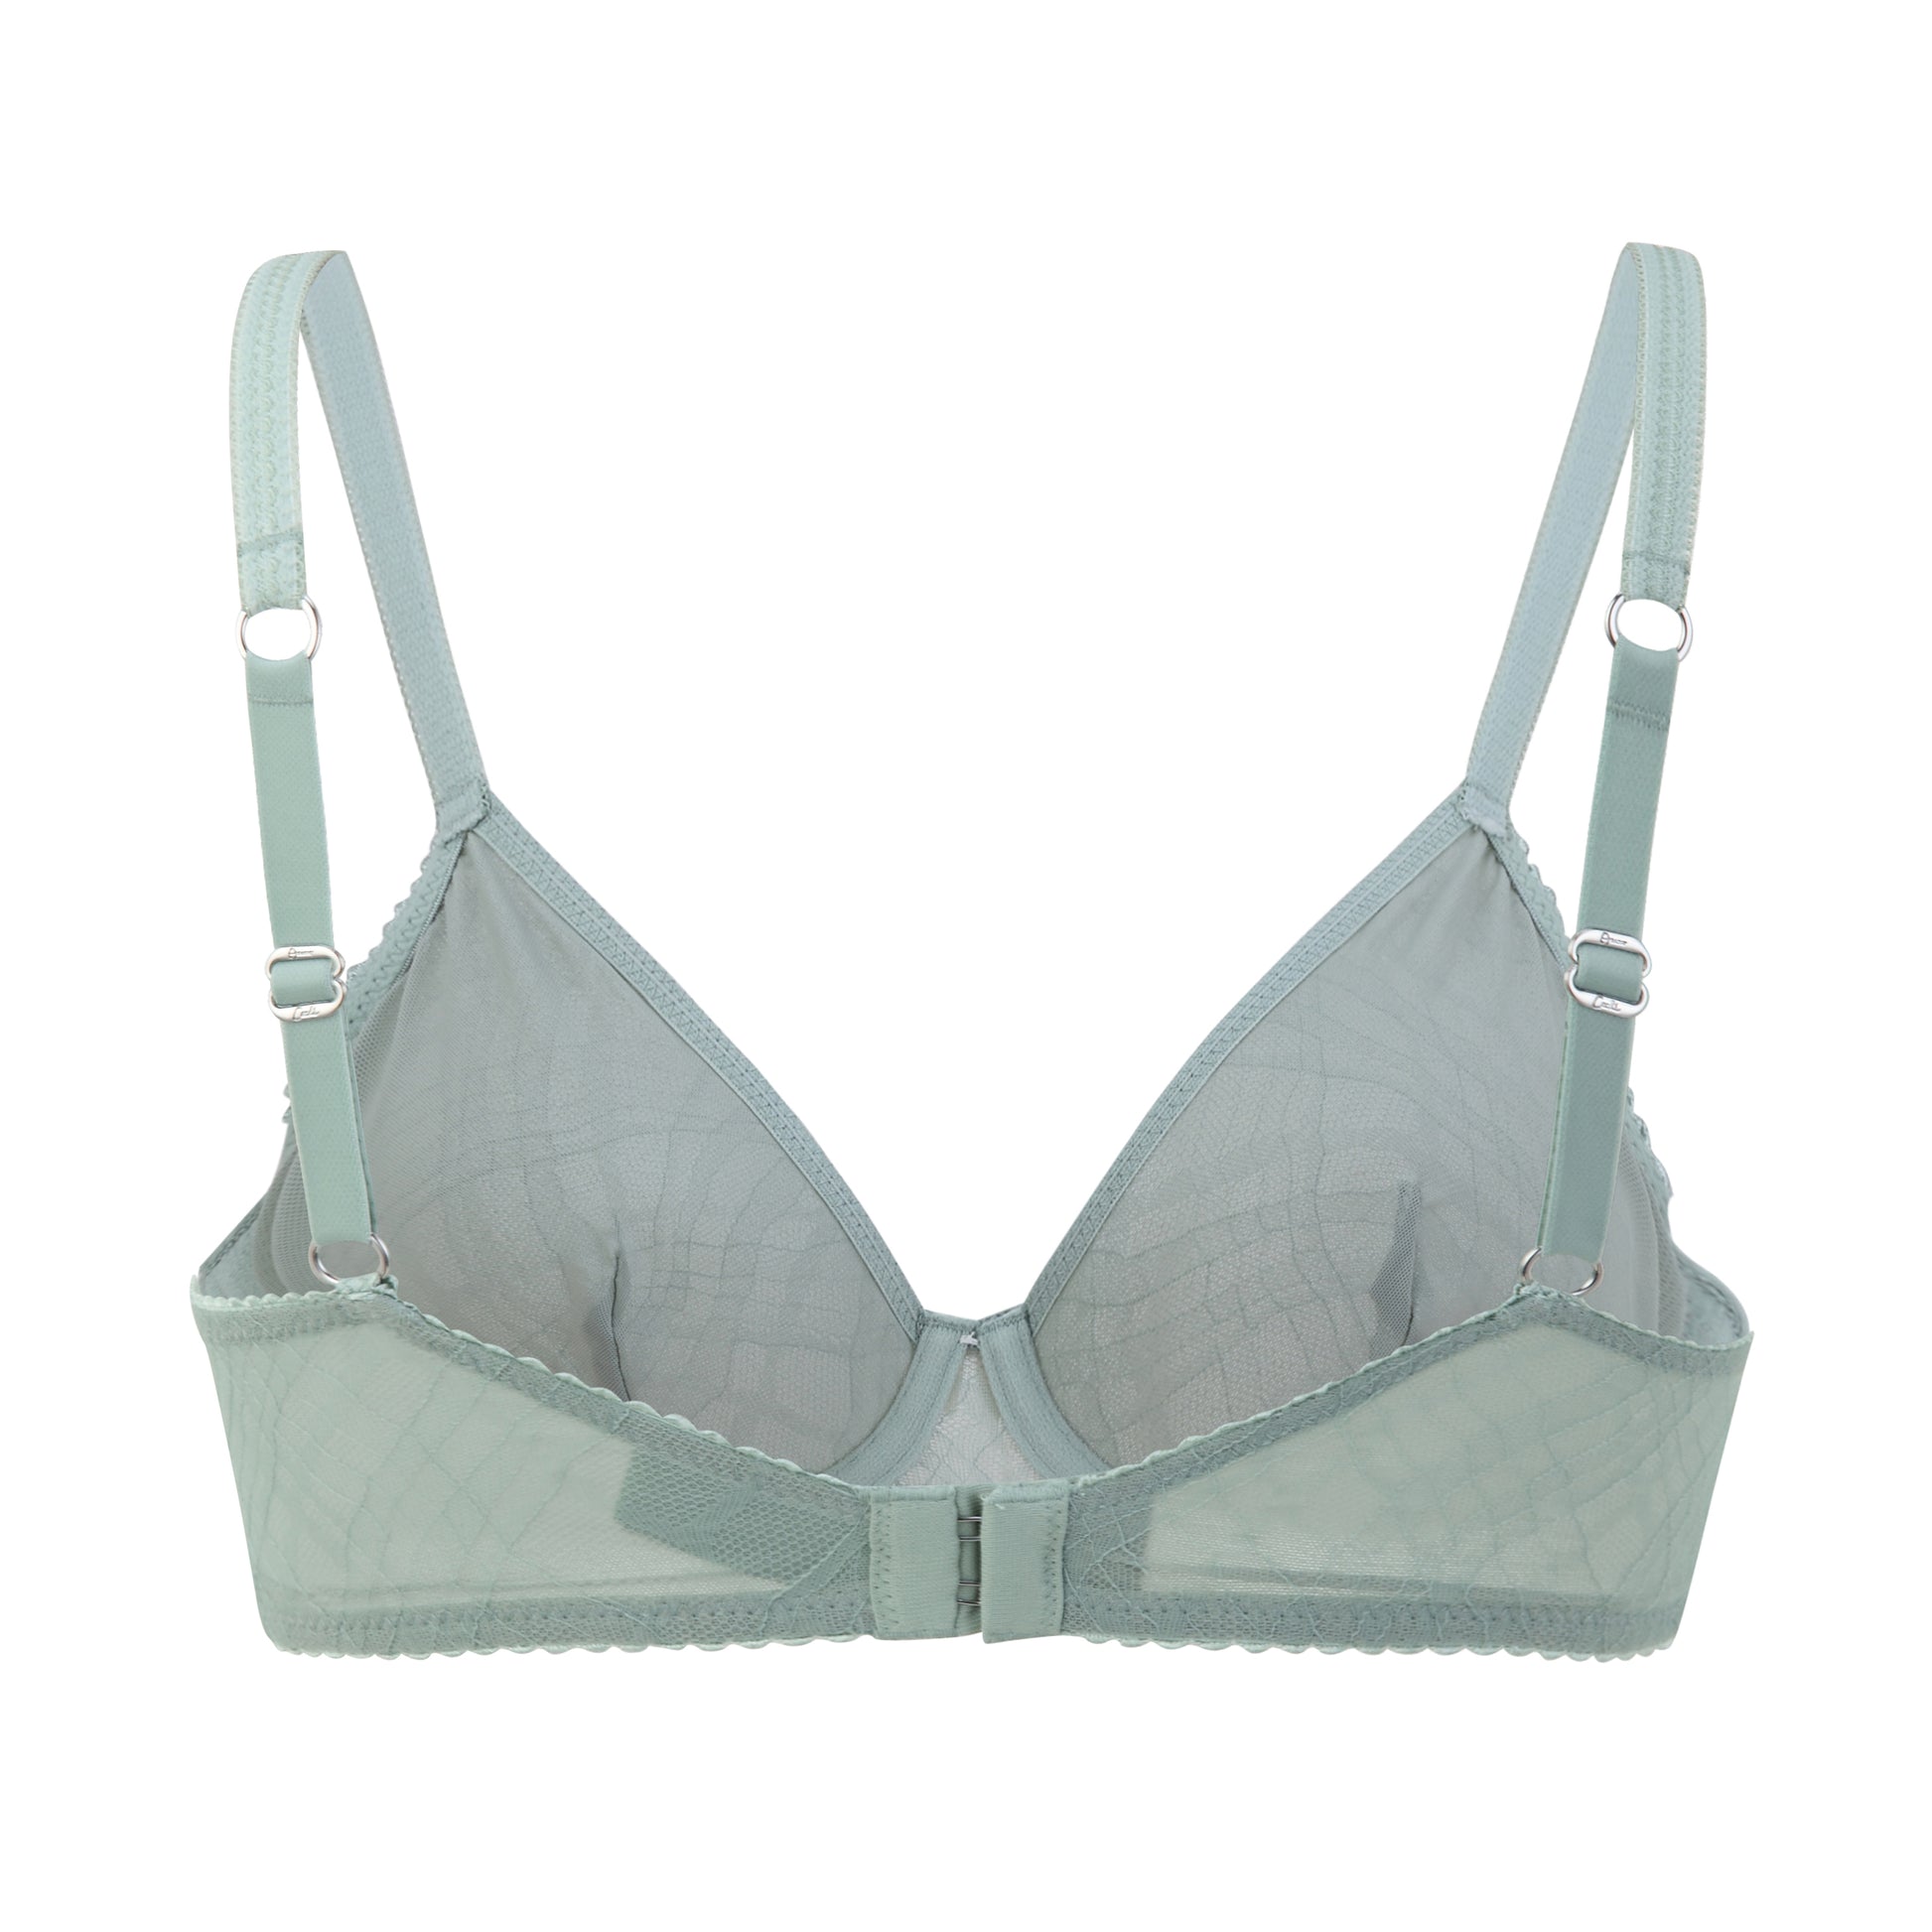 Love from Riza - Comfortable bra with light padding and its a non